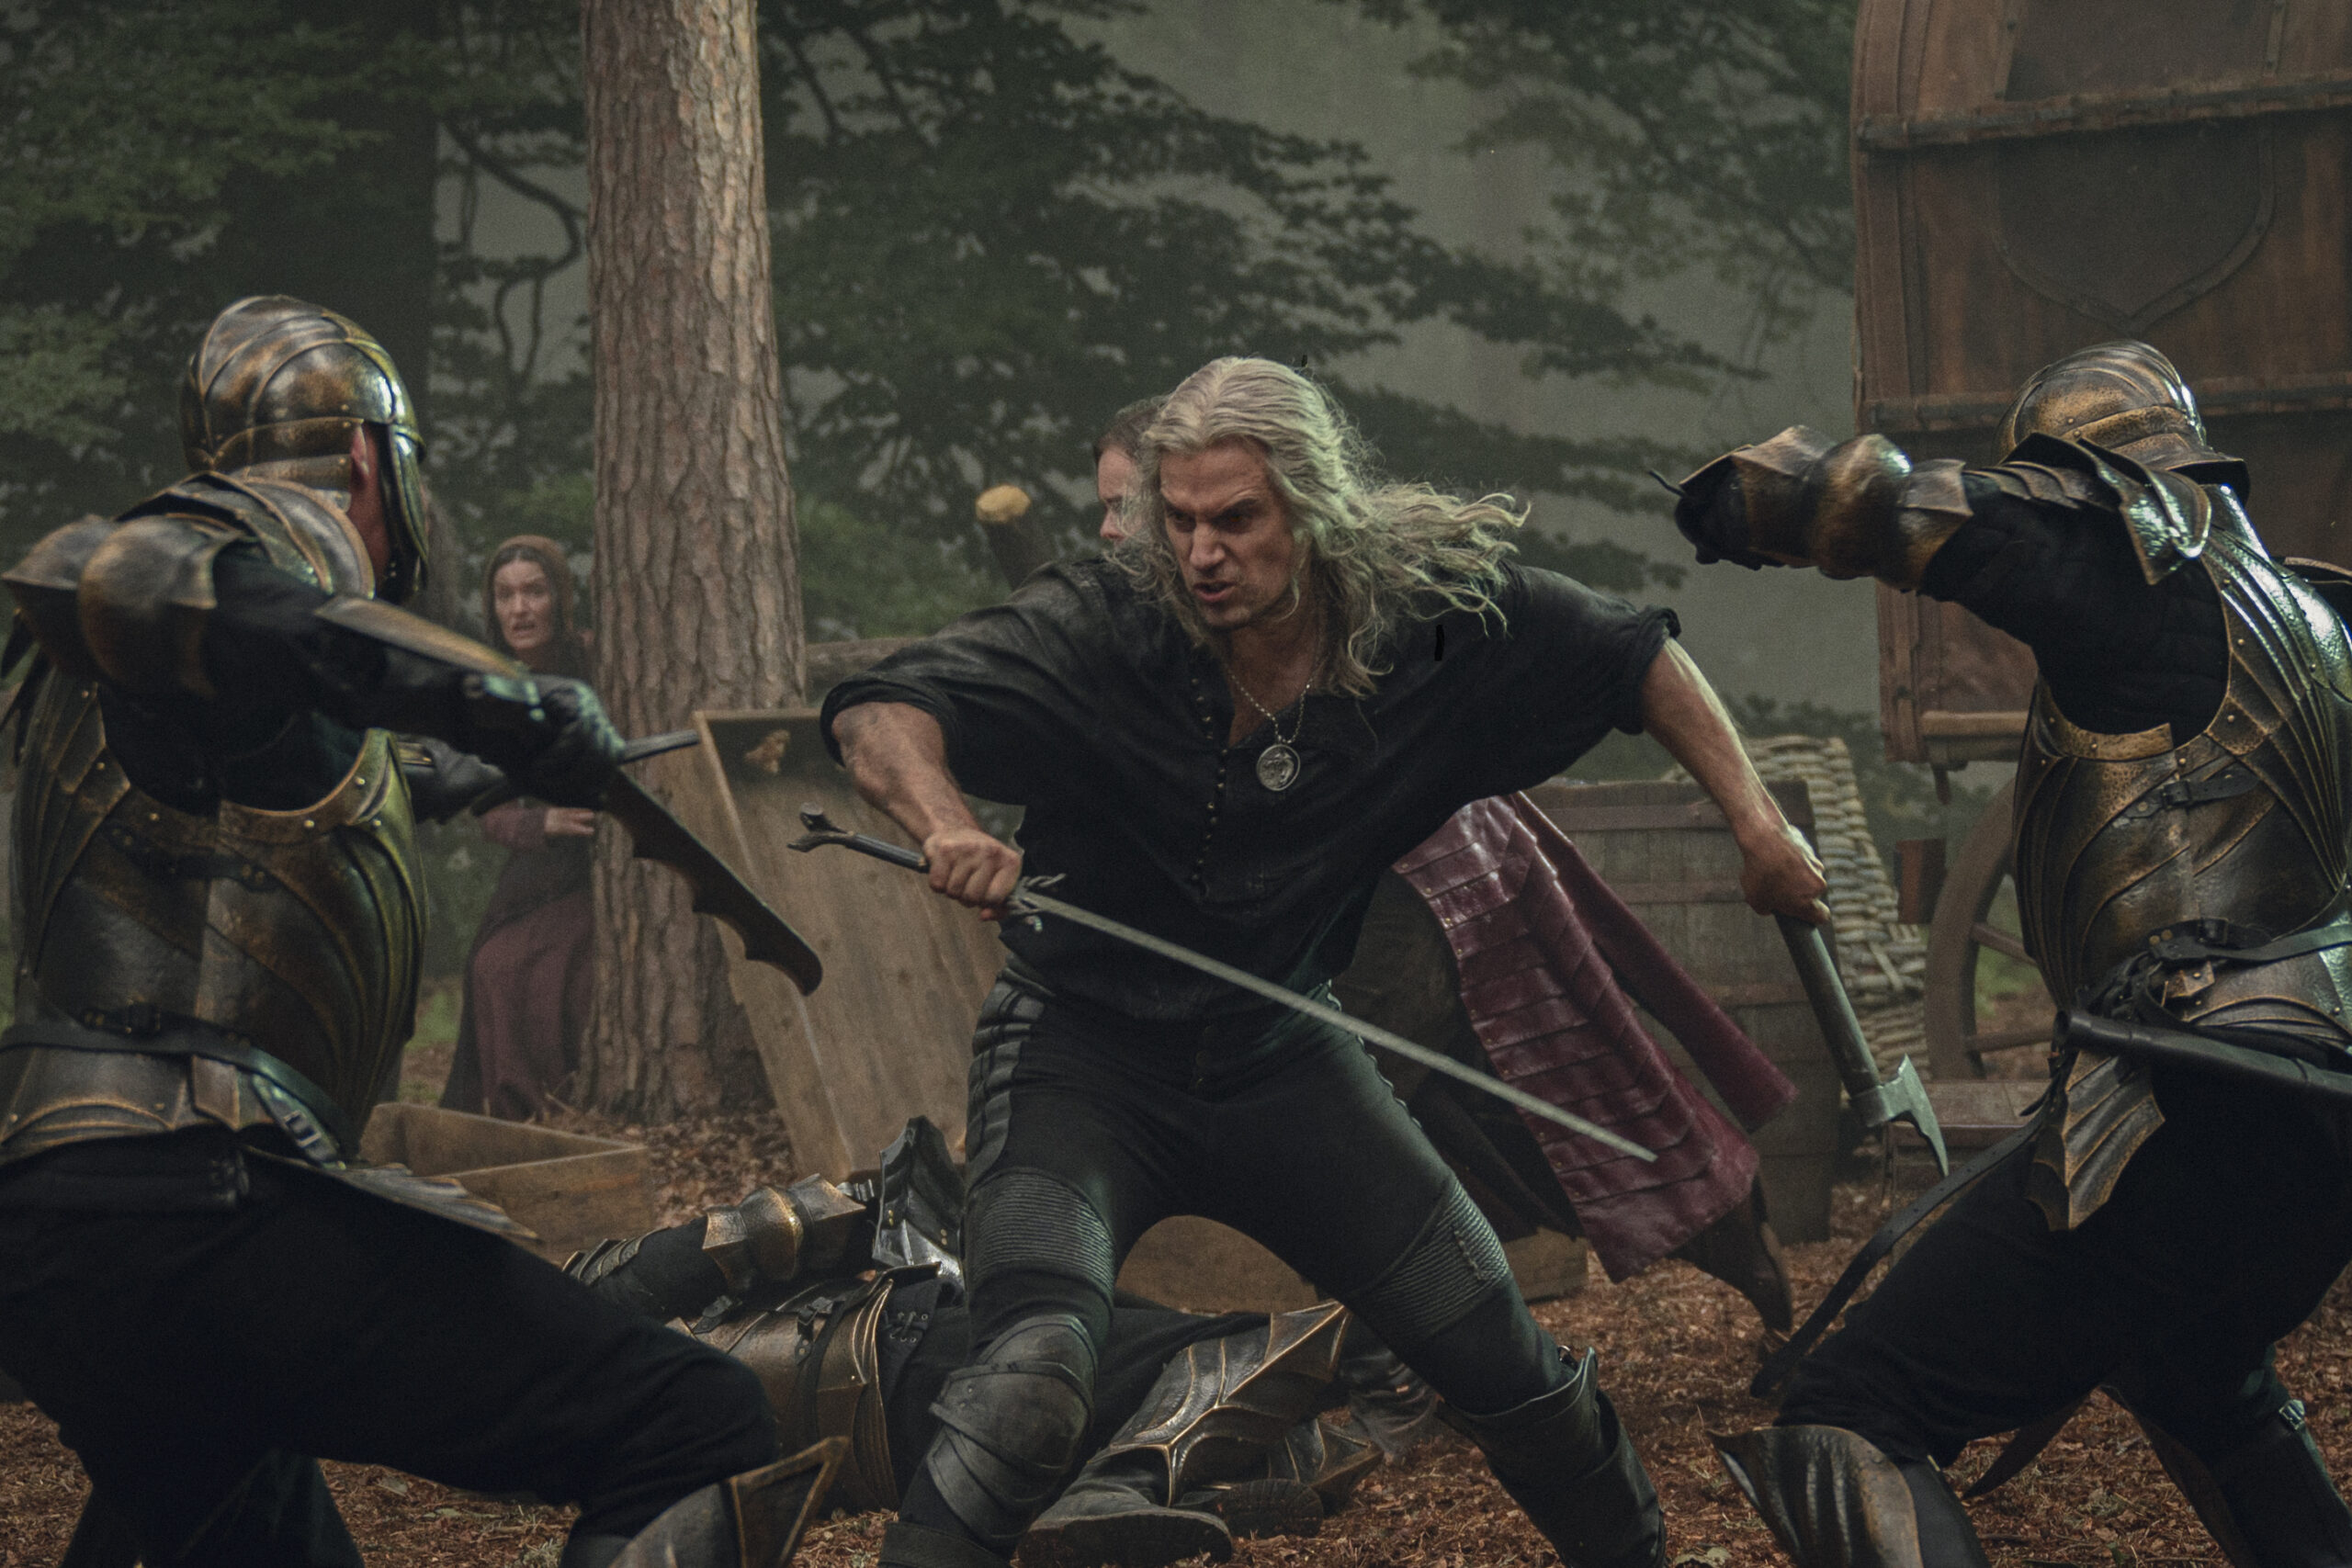 Geralt (Henry Cavill) lunges into battle in The Witcher Season 3 Episode 8 "The Cost of Chaos" (2023), Netflix